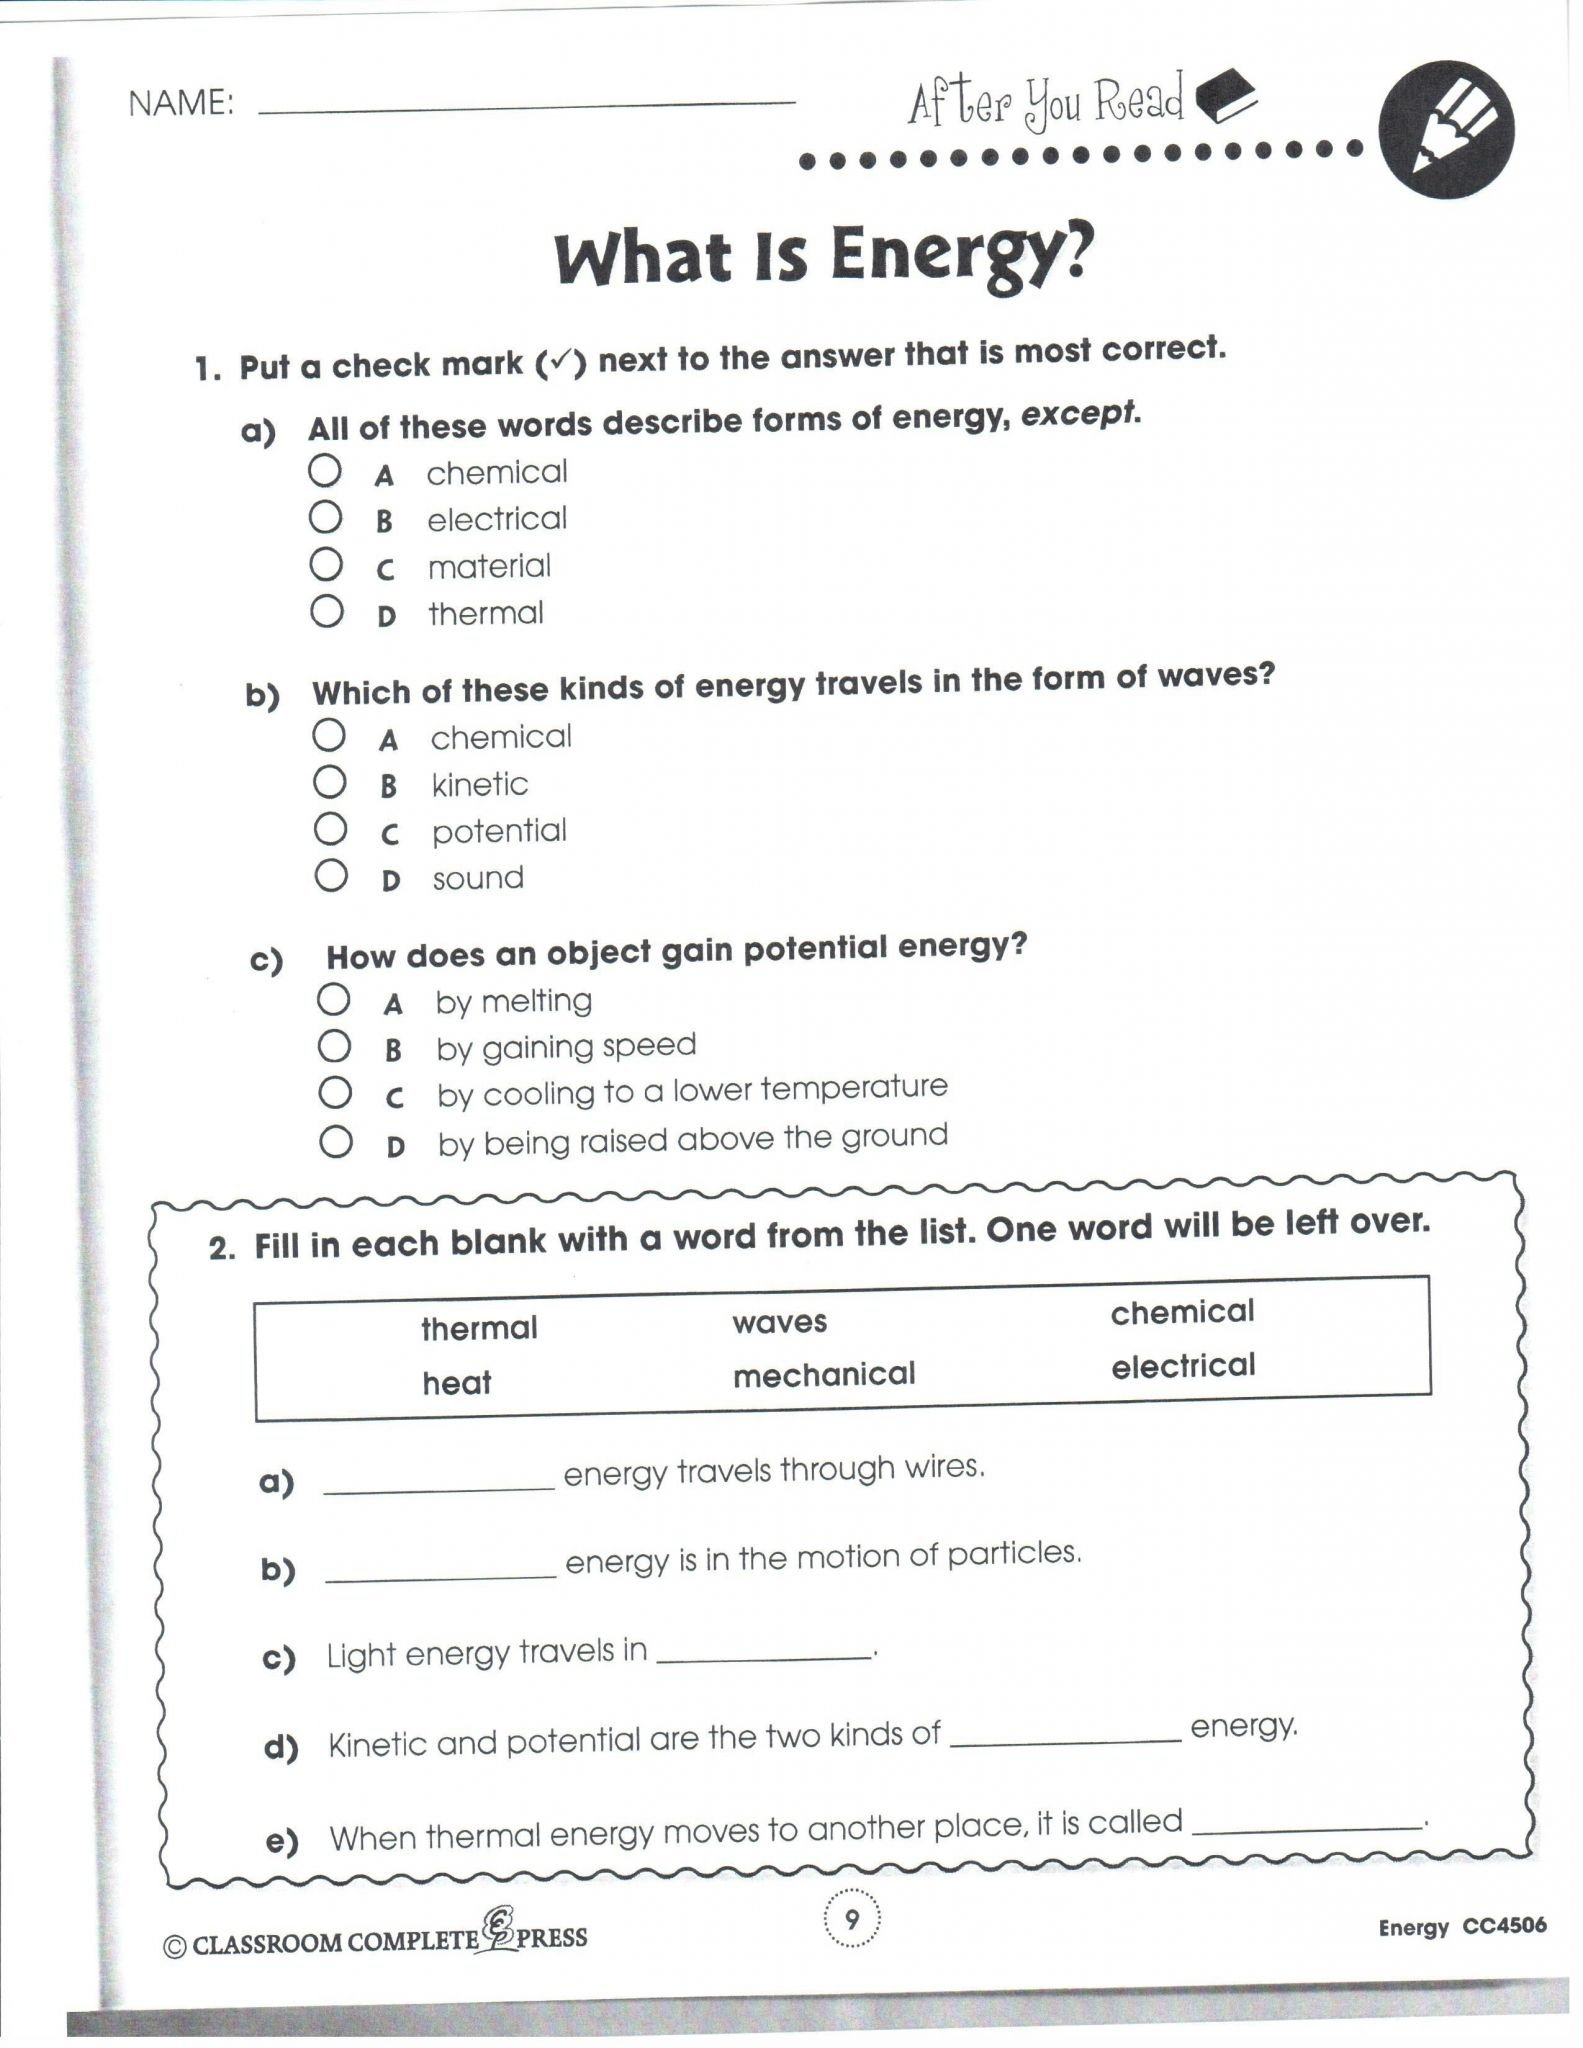 Bill Nye Pollution Solutions Worksheet Answers  Briefencounters Along With Bill Nye Pollution Solutions Worksheet Answers